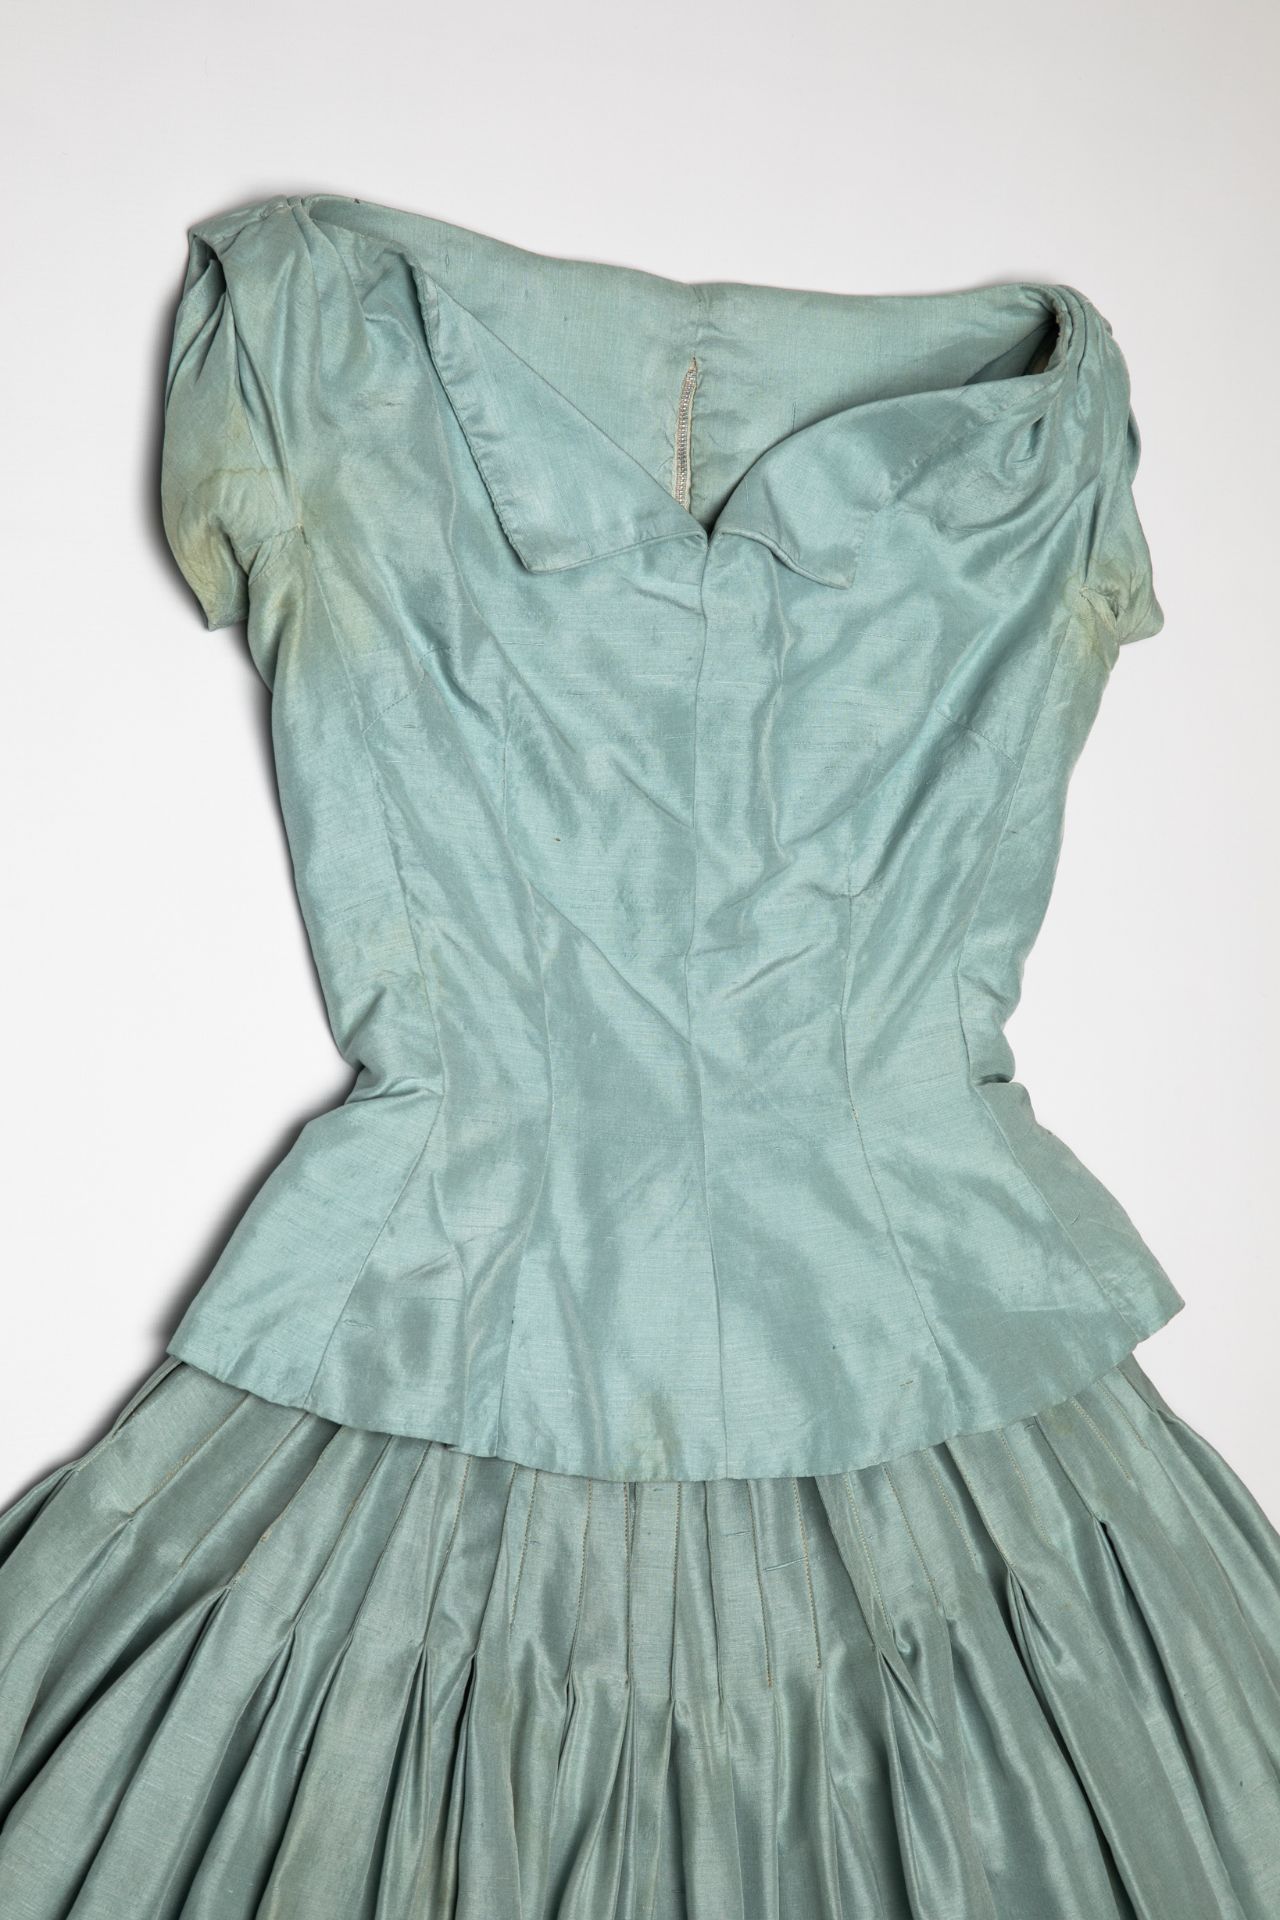 Christian Dior, duckegg blue two piece afternoon ensemble, 1956/57 - Image 5 of 8